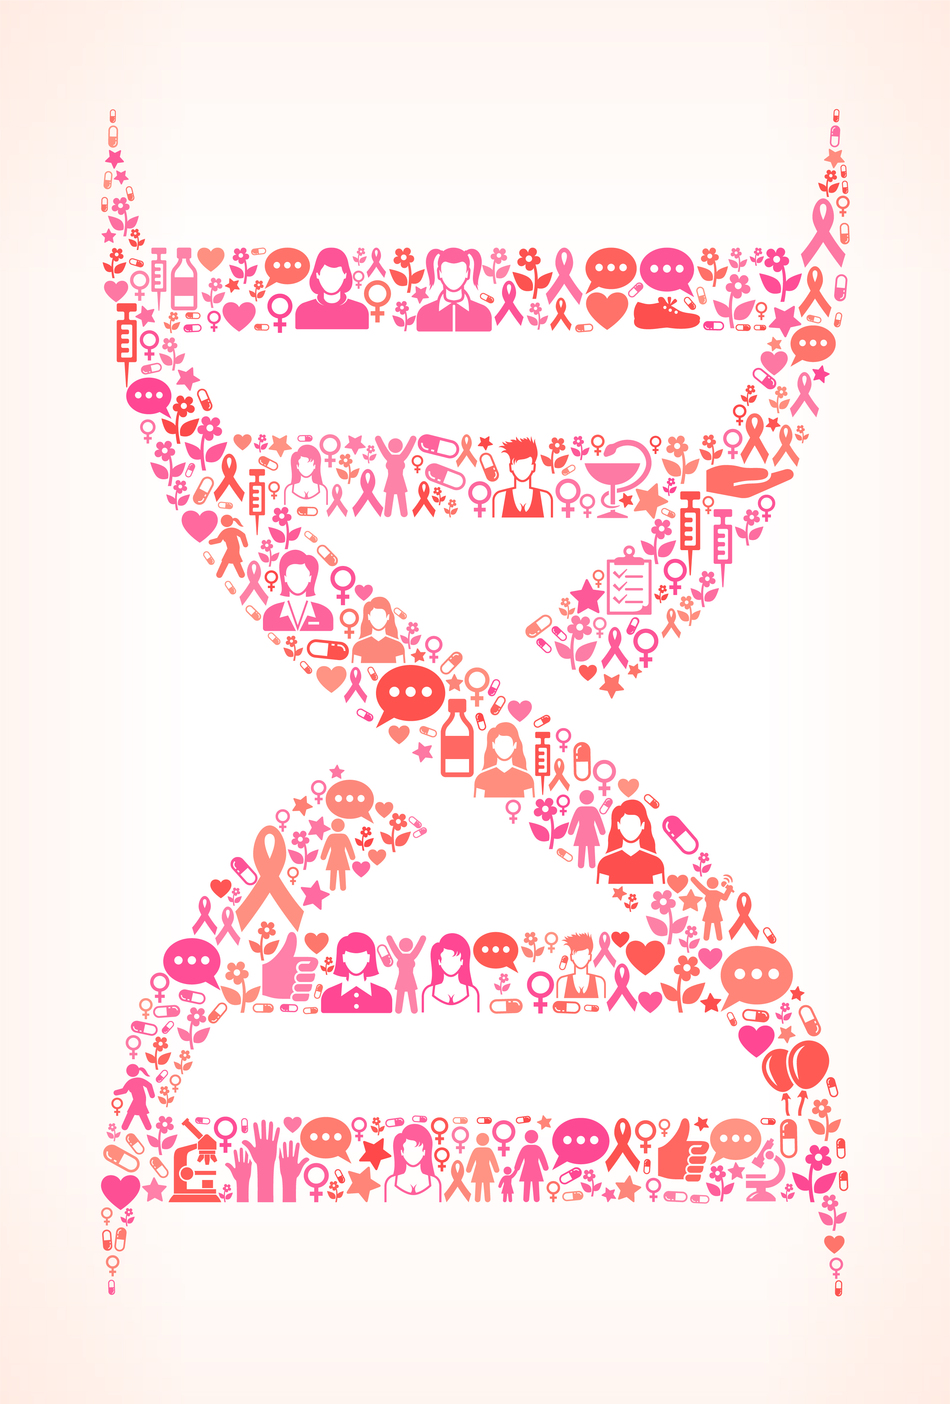 Should Every Woman Undergo Genetic Testing for Breast Cancer?